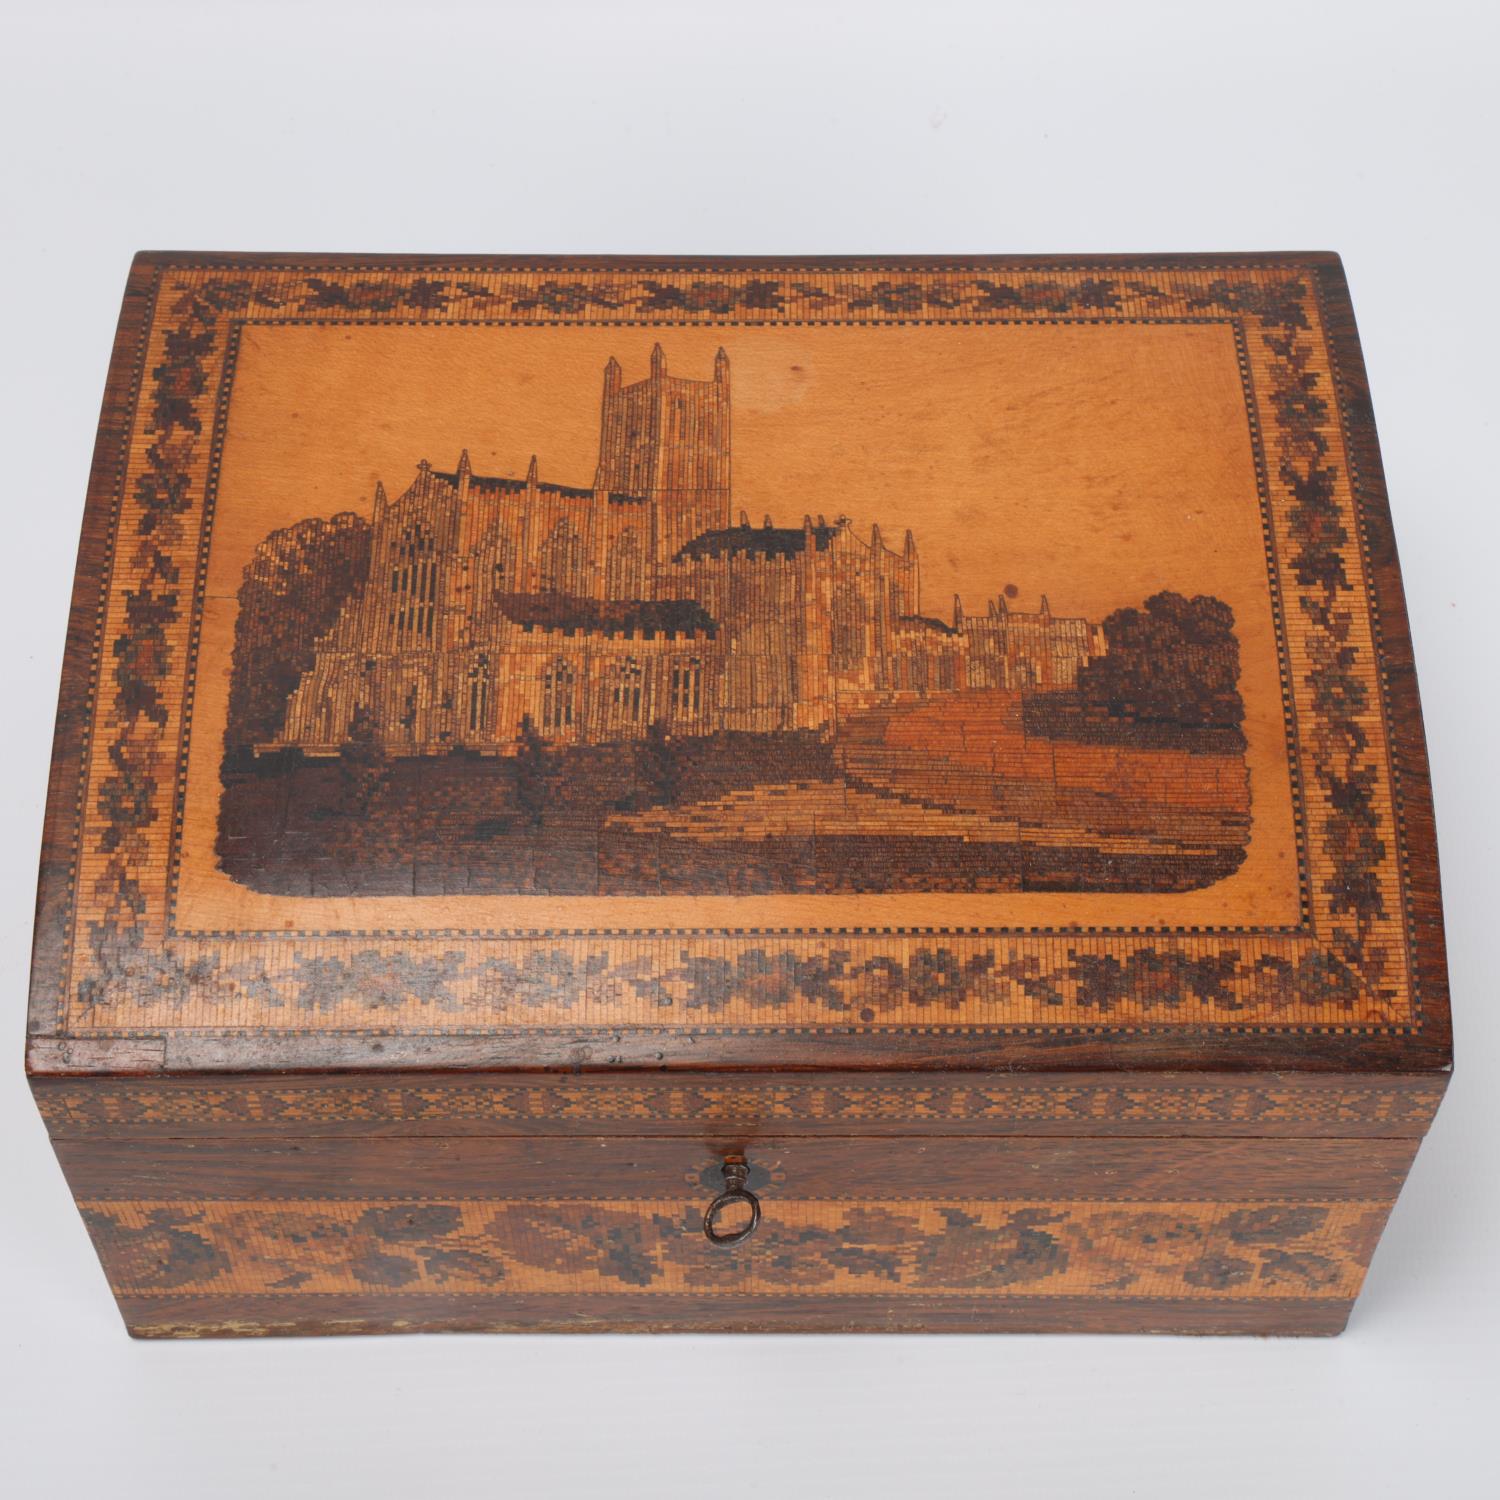 Tunbridge Ware, 19th century rosewood and micro-mosaic dome-top stationery box, pictorial lid - Image 2 of 3